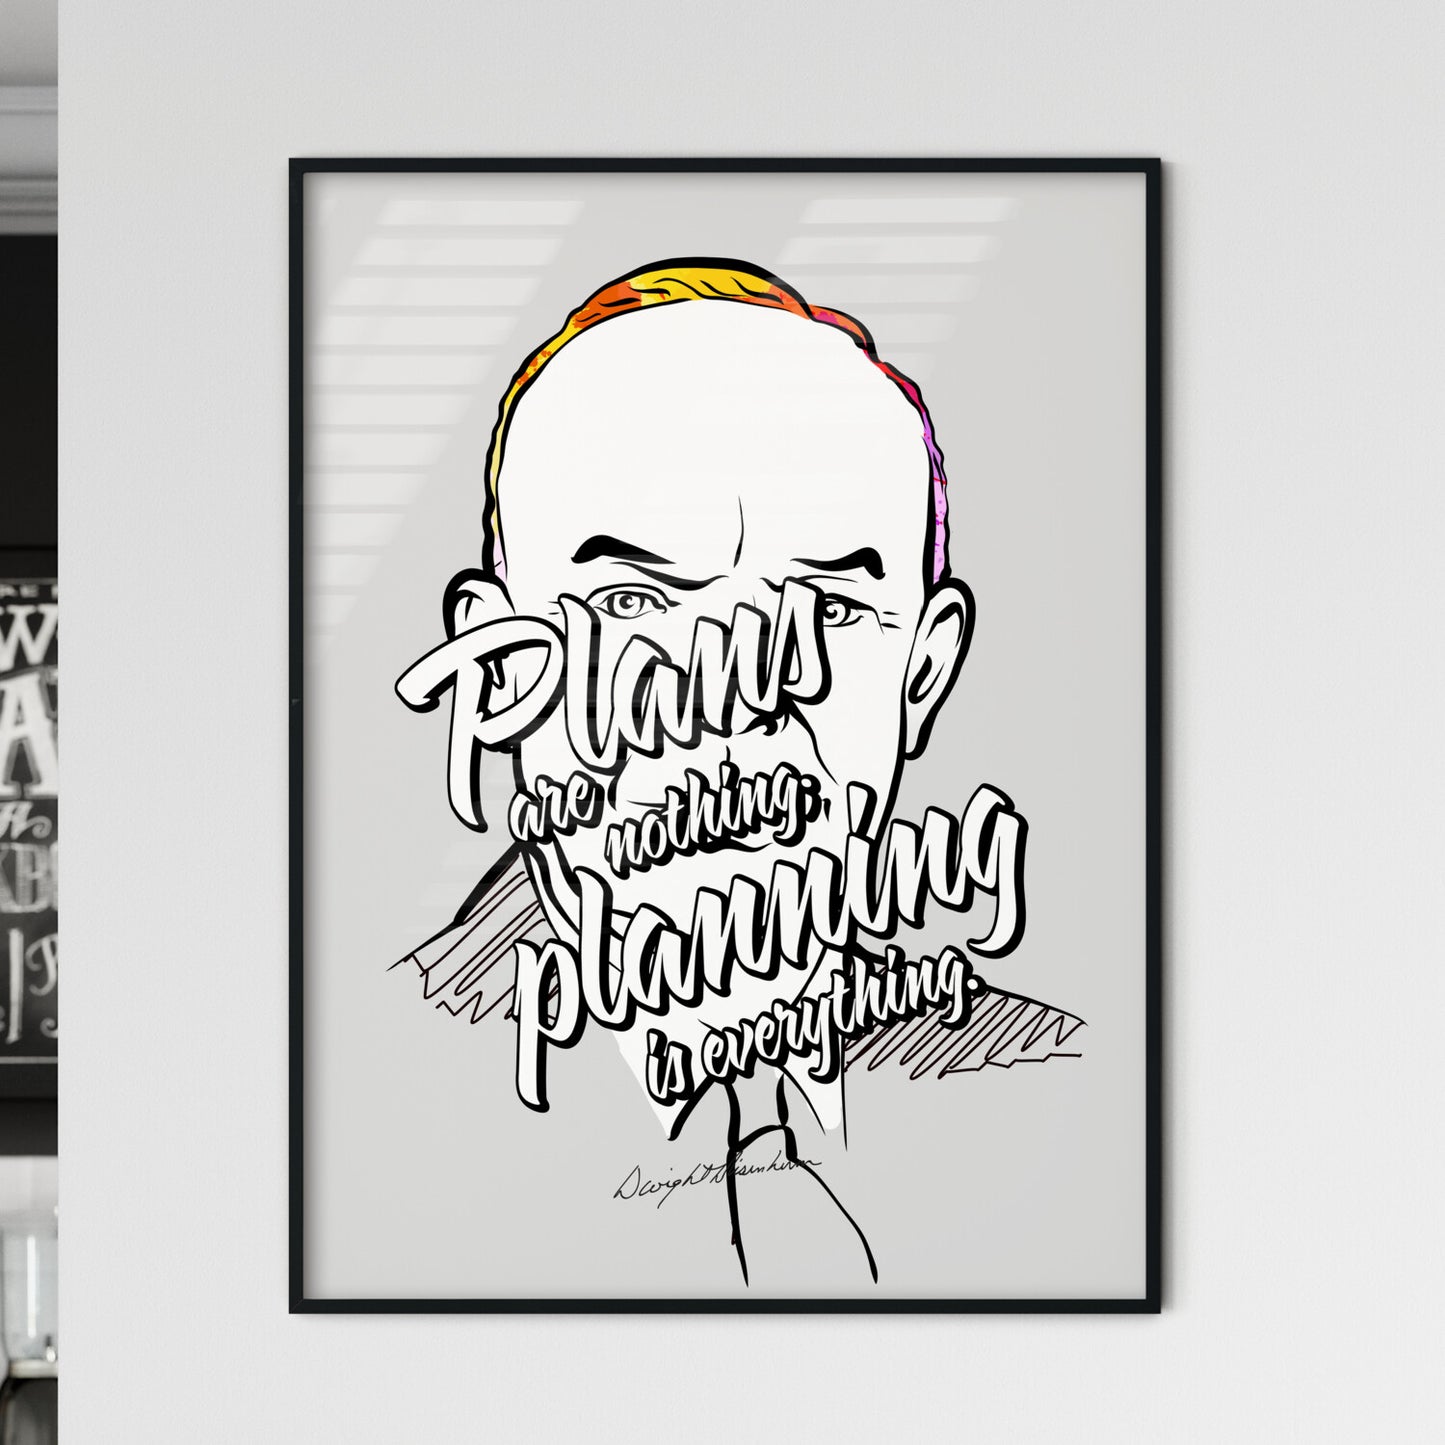 Dwight D. Eisenhower Art Print – Plans Are Nothing; Planning Is Everything Quote. Perfect print for patriots.